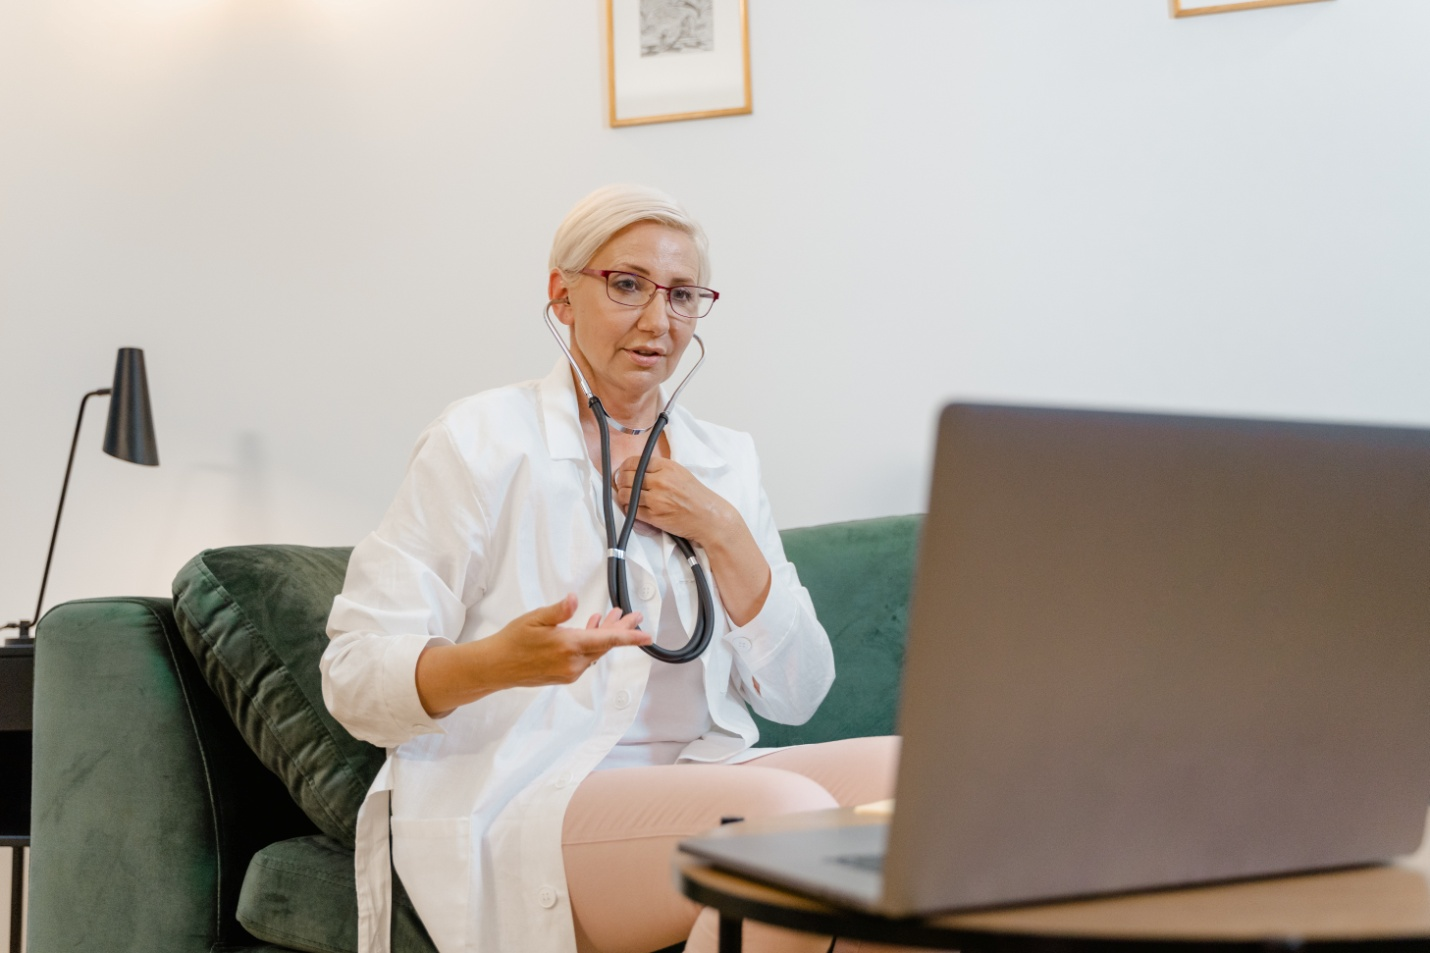 An online doctor during a virtual consultation